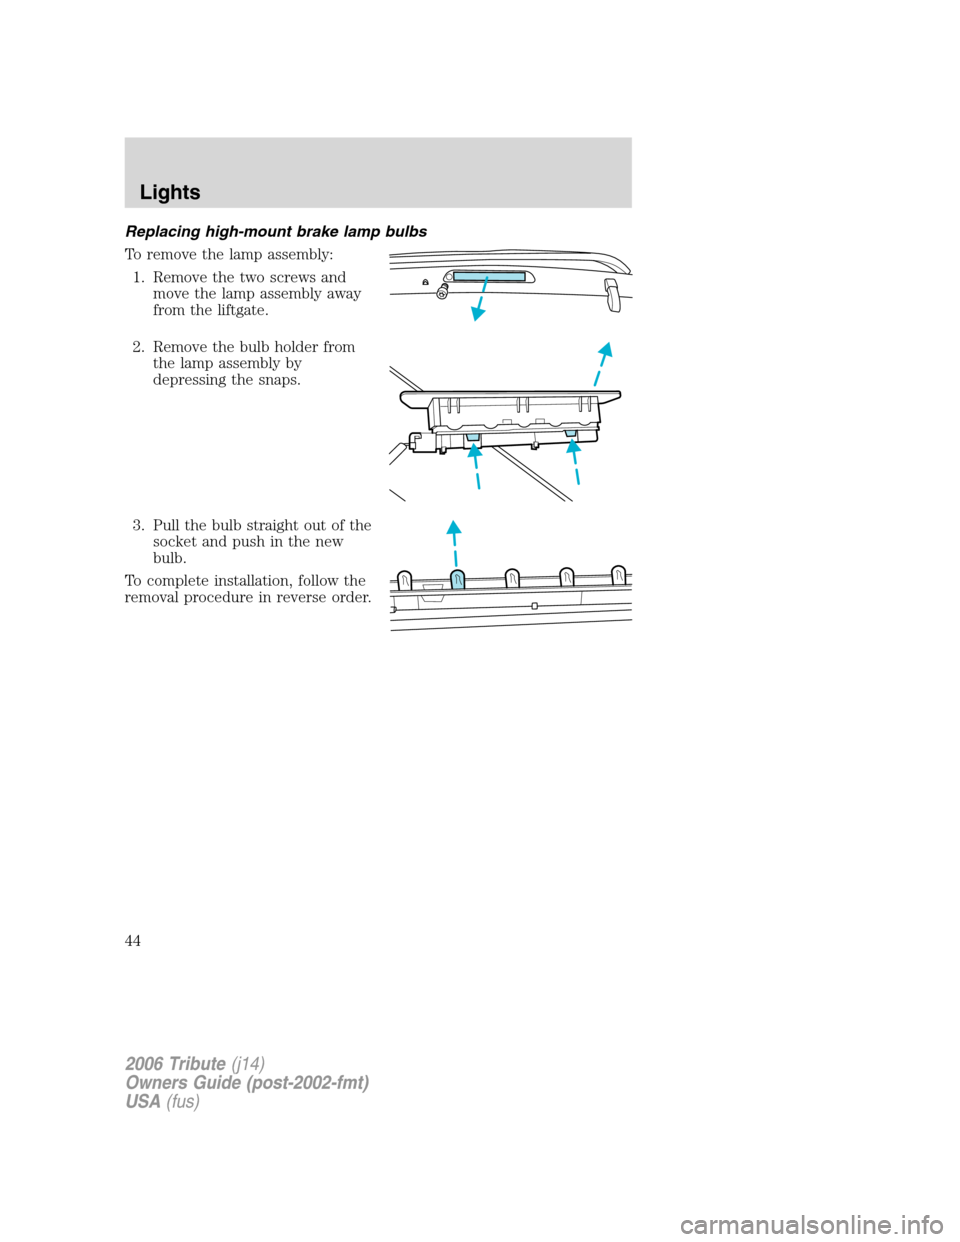 MAZDA MODEL TRIBUTE 2006  Owners Manual (in English) Replacing high-mount brake lamp bulbs
To remove the lamp assembly:
1. Remove the two screws and
move the lamp assembly away
from the liftgate.
2. Remove the bulb holder from
the lamp assembly by
depre